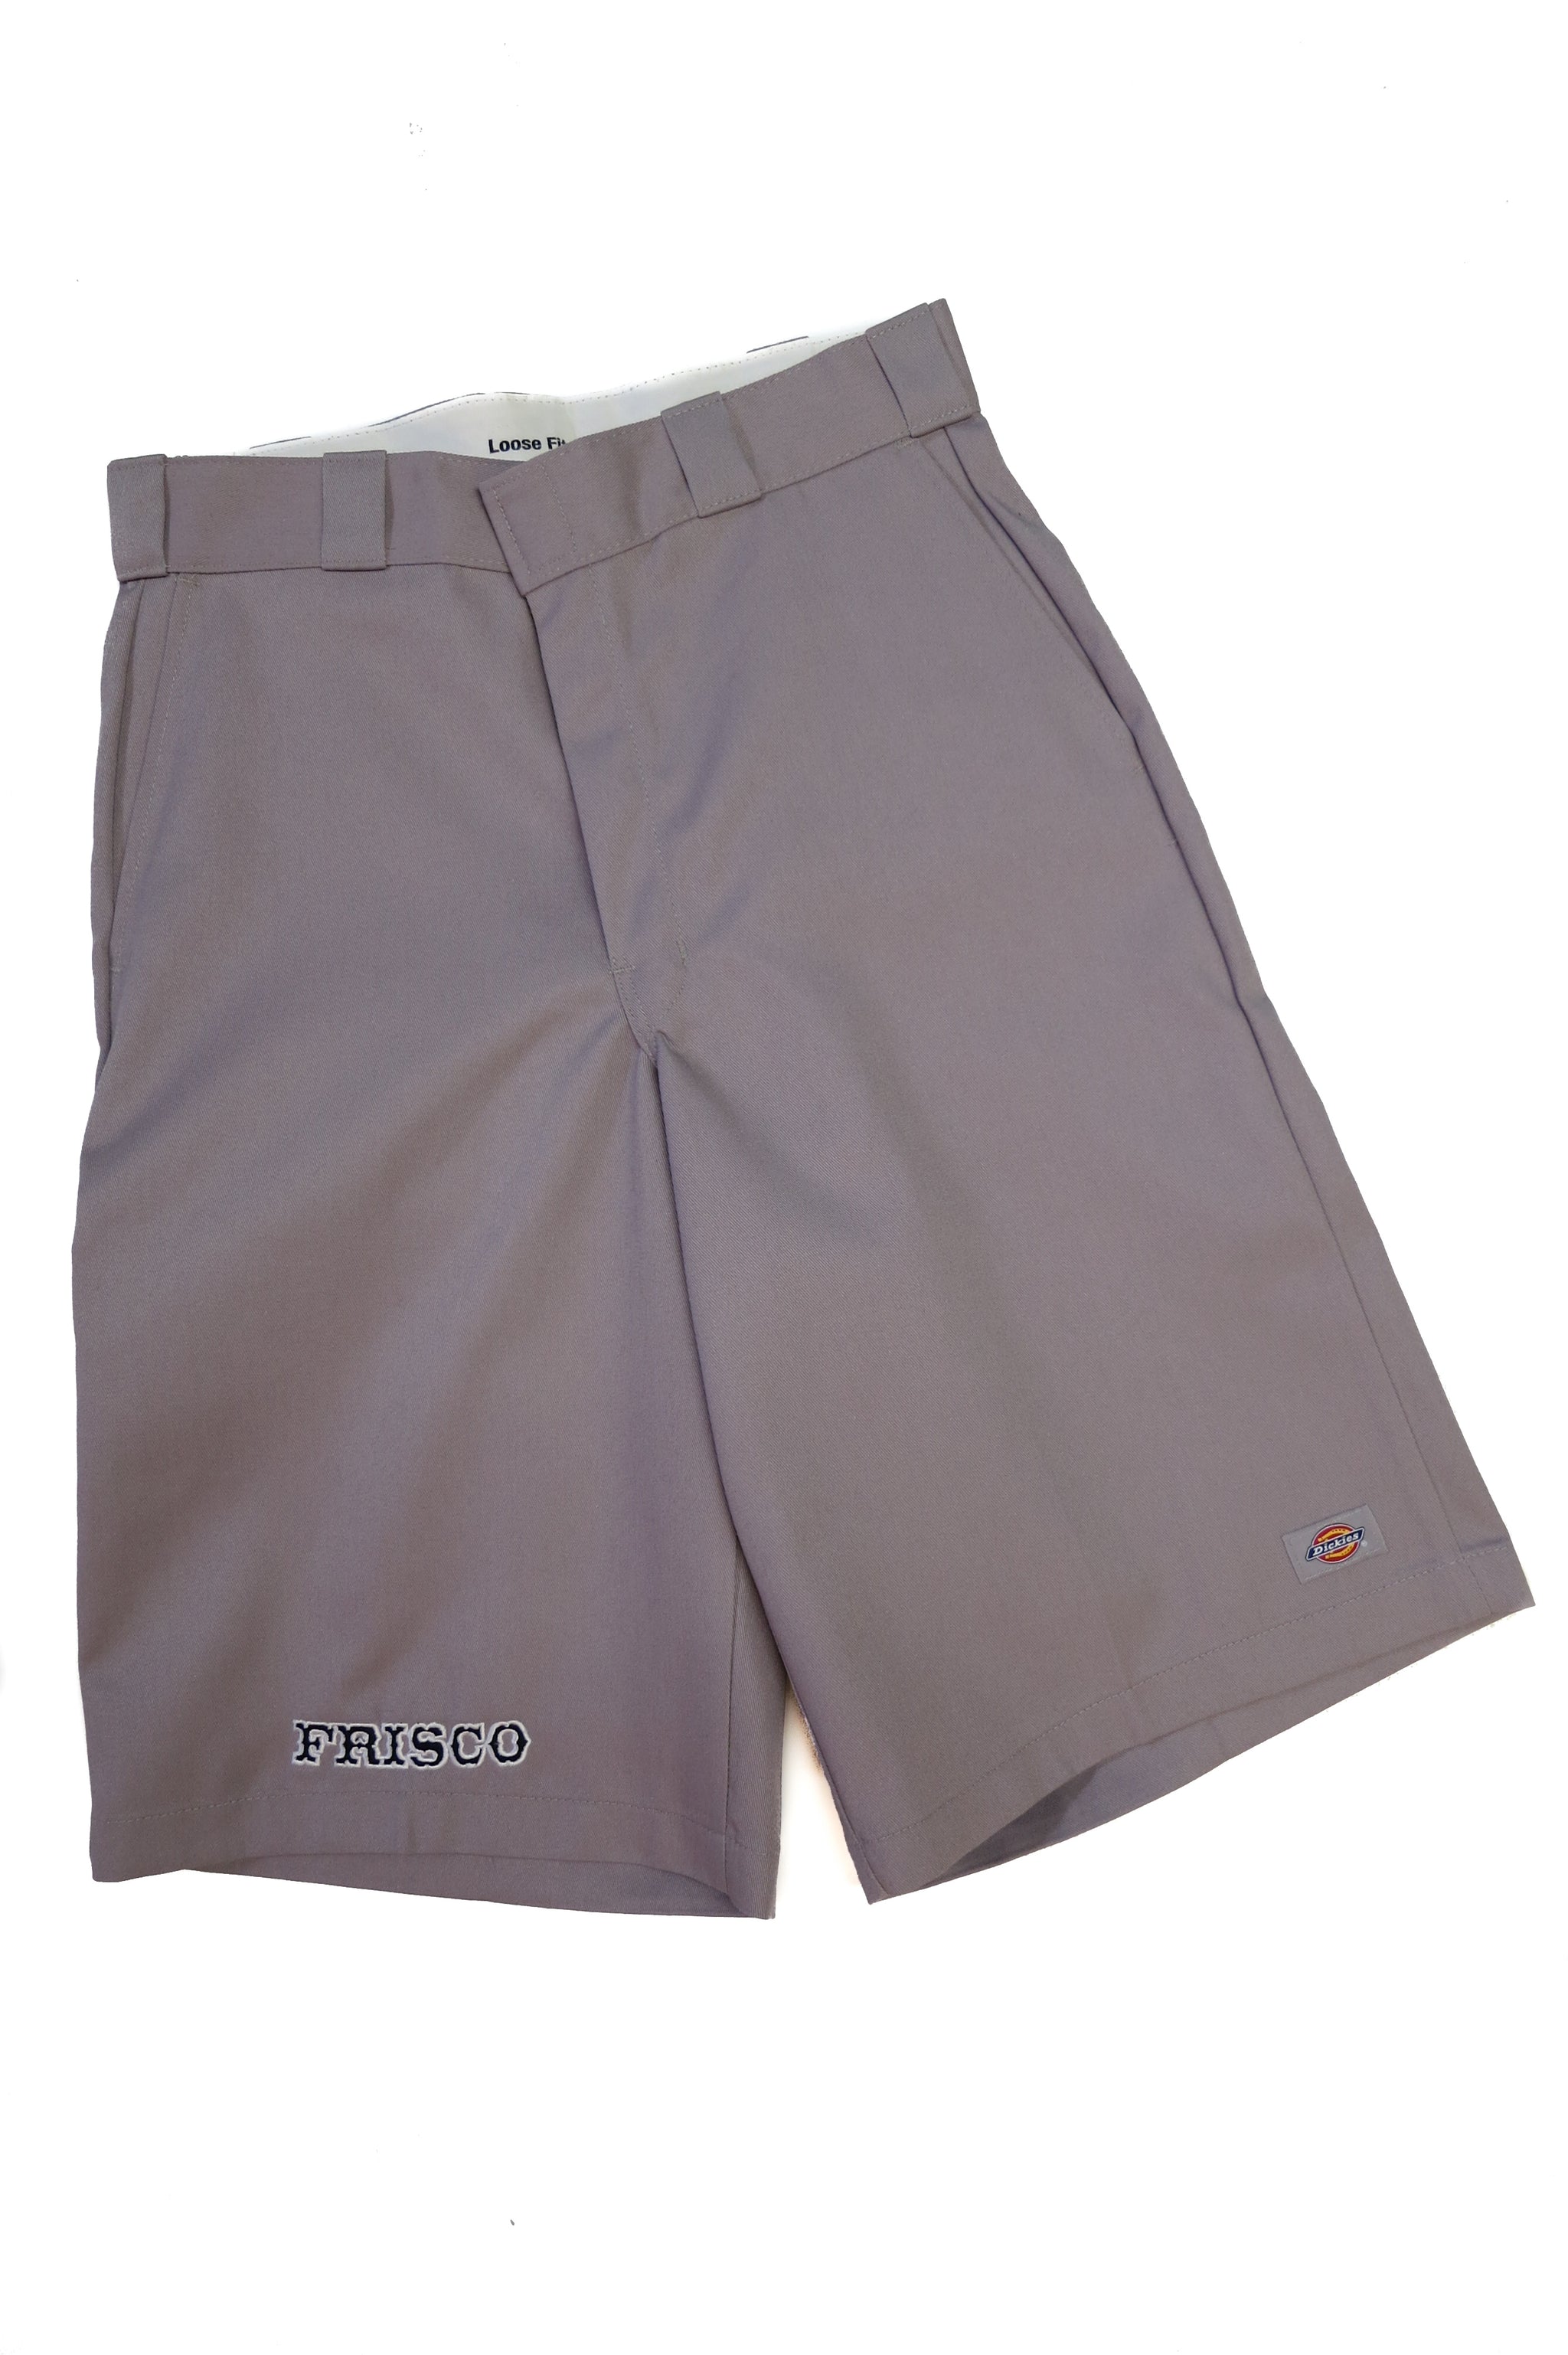 Frisco Embroidered Work Shorts - 415 Clothing, Inc.